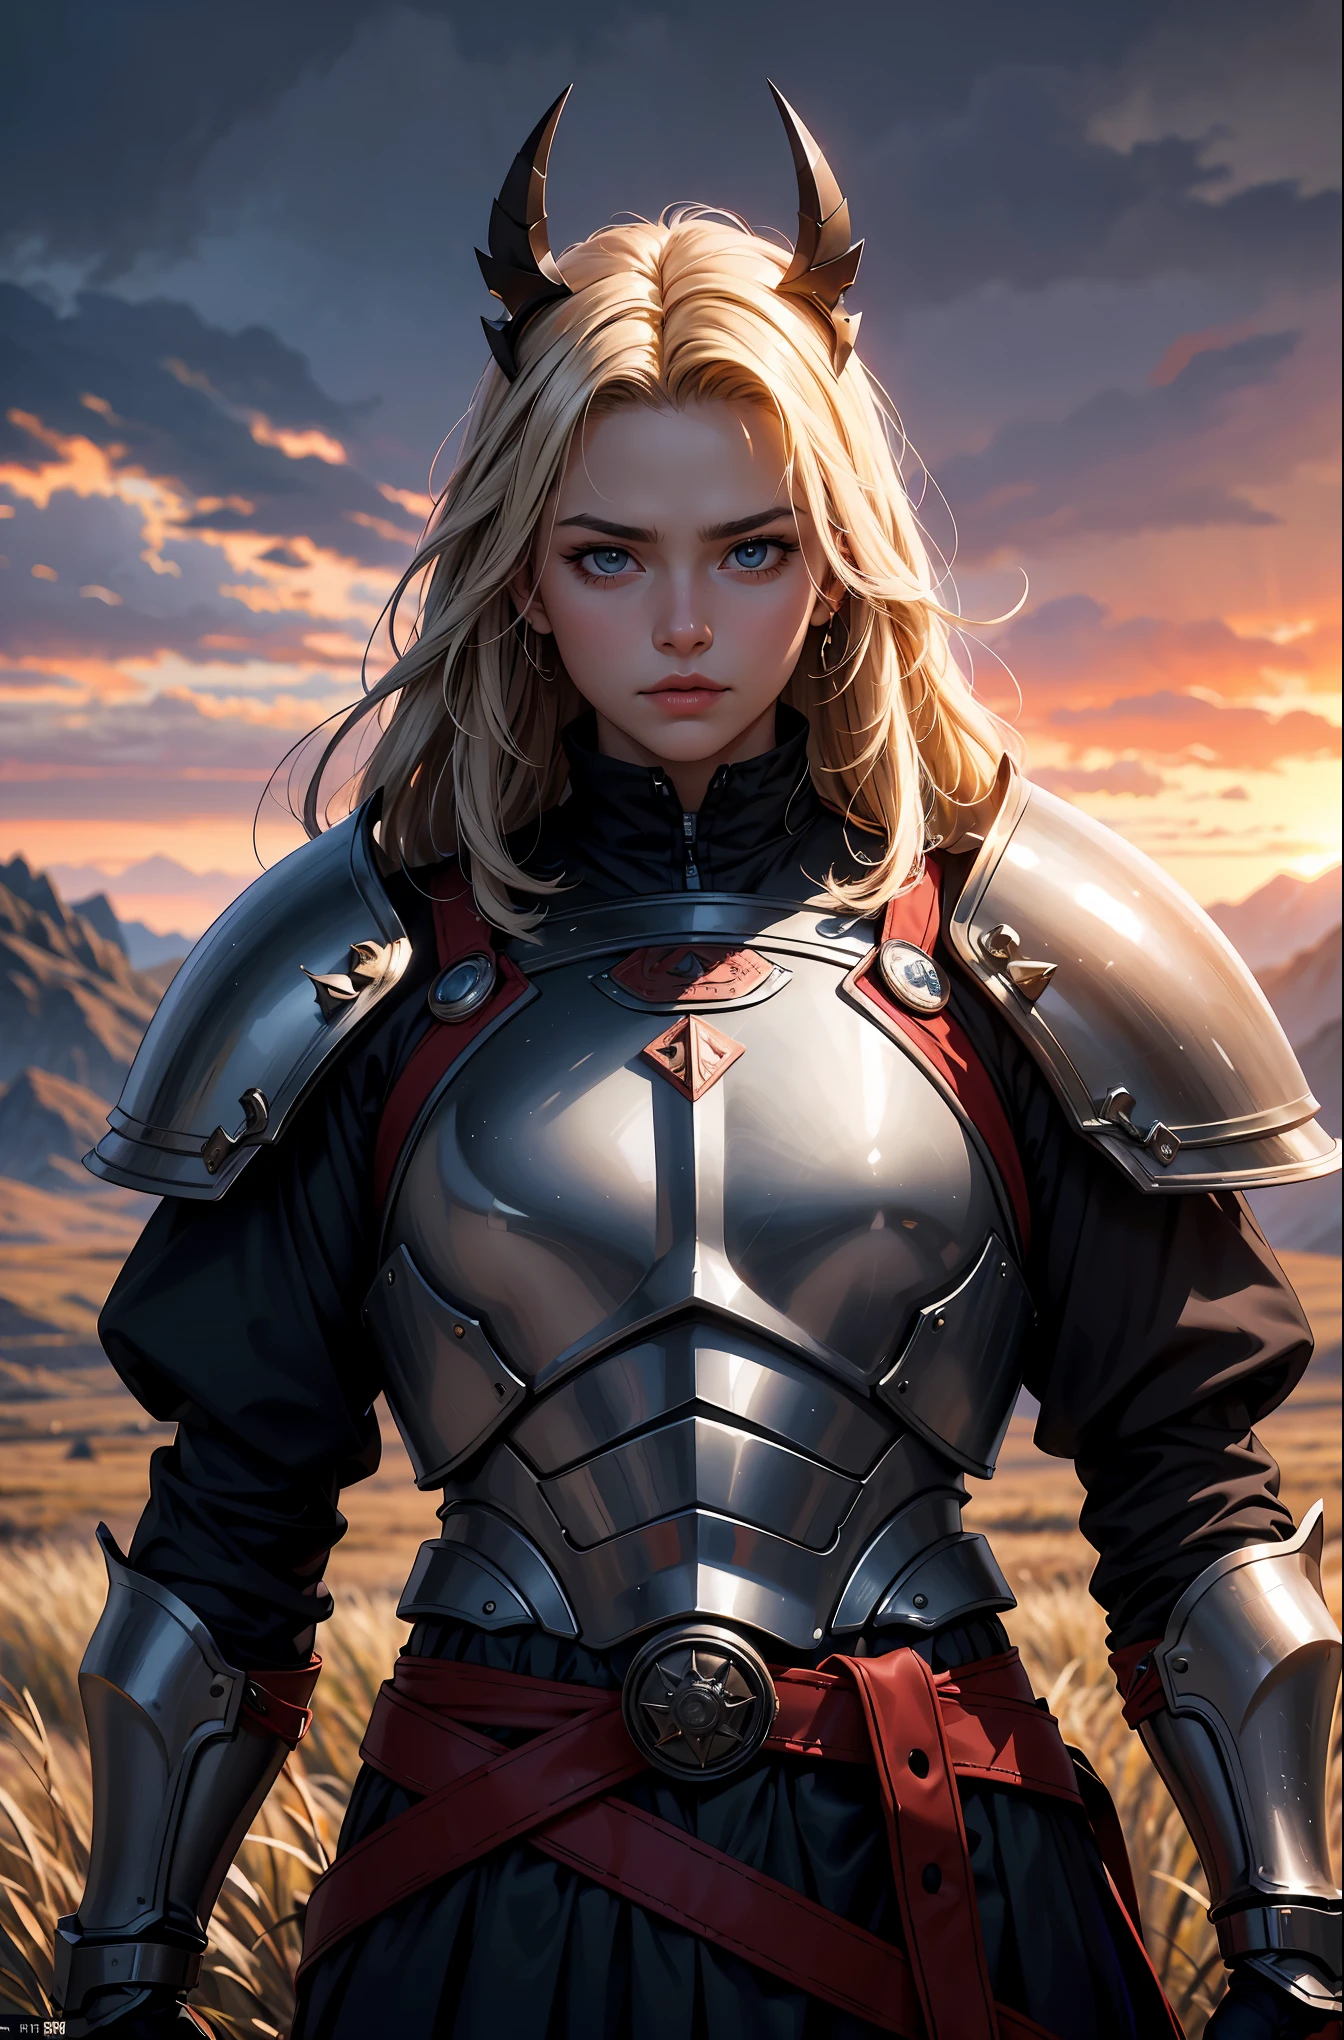 A fully armed warrior standing on a desolate field,backlit by the setting sun,gripping a sharp katana sword, determined eyes,warrior armor,sturdy armor,medieval armor,armor details,complex armor design,stoic stance,desolate landscape,sunset backdrop,detailed landscape,clear skies,best quality,4k,8k,highres,masterpiece:1.2,ultra-detailed,realistic,photorealistic,photo-realistic:1.37,HDR,UHD,studio lighting,ultra-fine painting,sharp focus,professional,portrait,sci-fi,vivid colors,warm color tones, dramatic lighting
